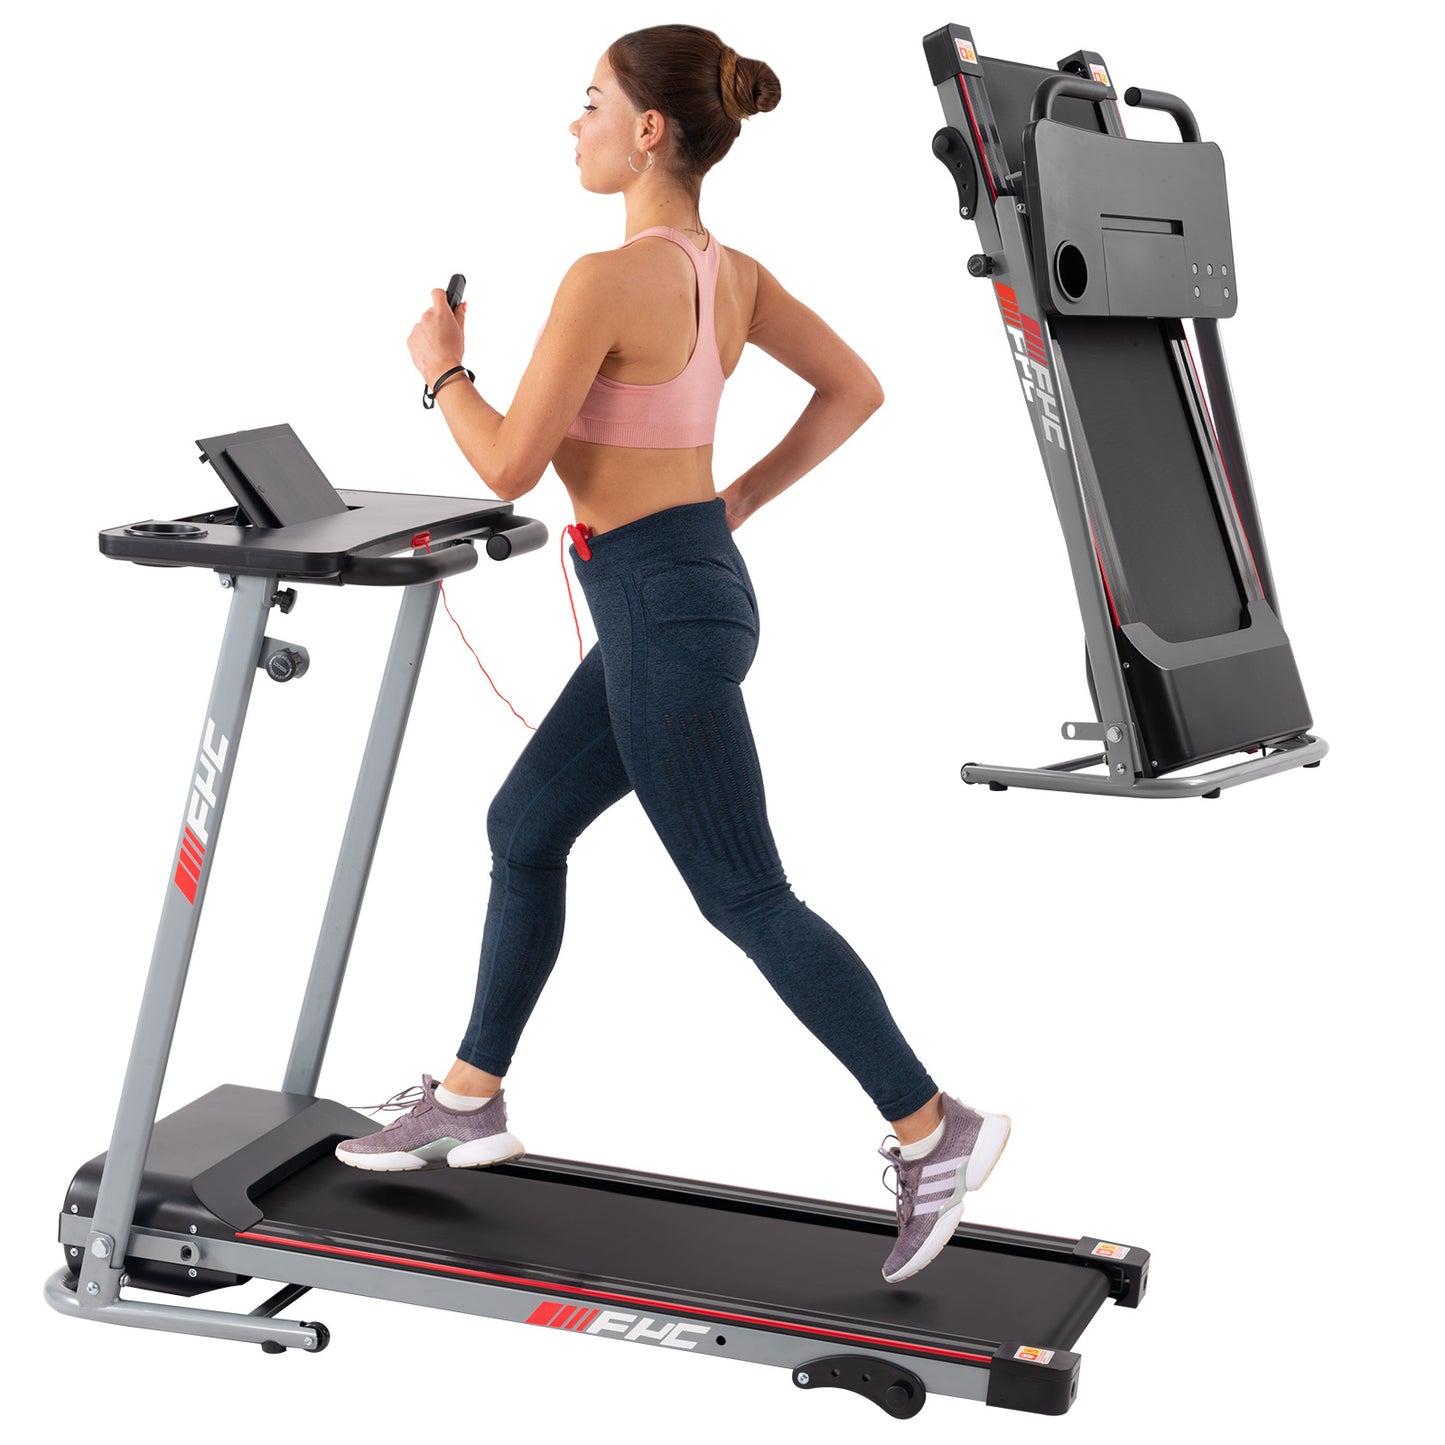 FYC Folding Treadmill for Home with Desk - 2.5HP Compact Electric Treadmill for Running and Walking Foldable Portable Running Machine for Small Spaces Workout;  265LBS Weight Capacity